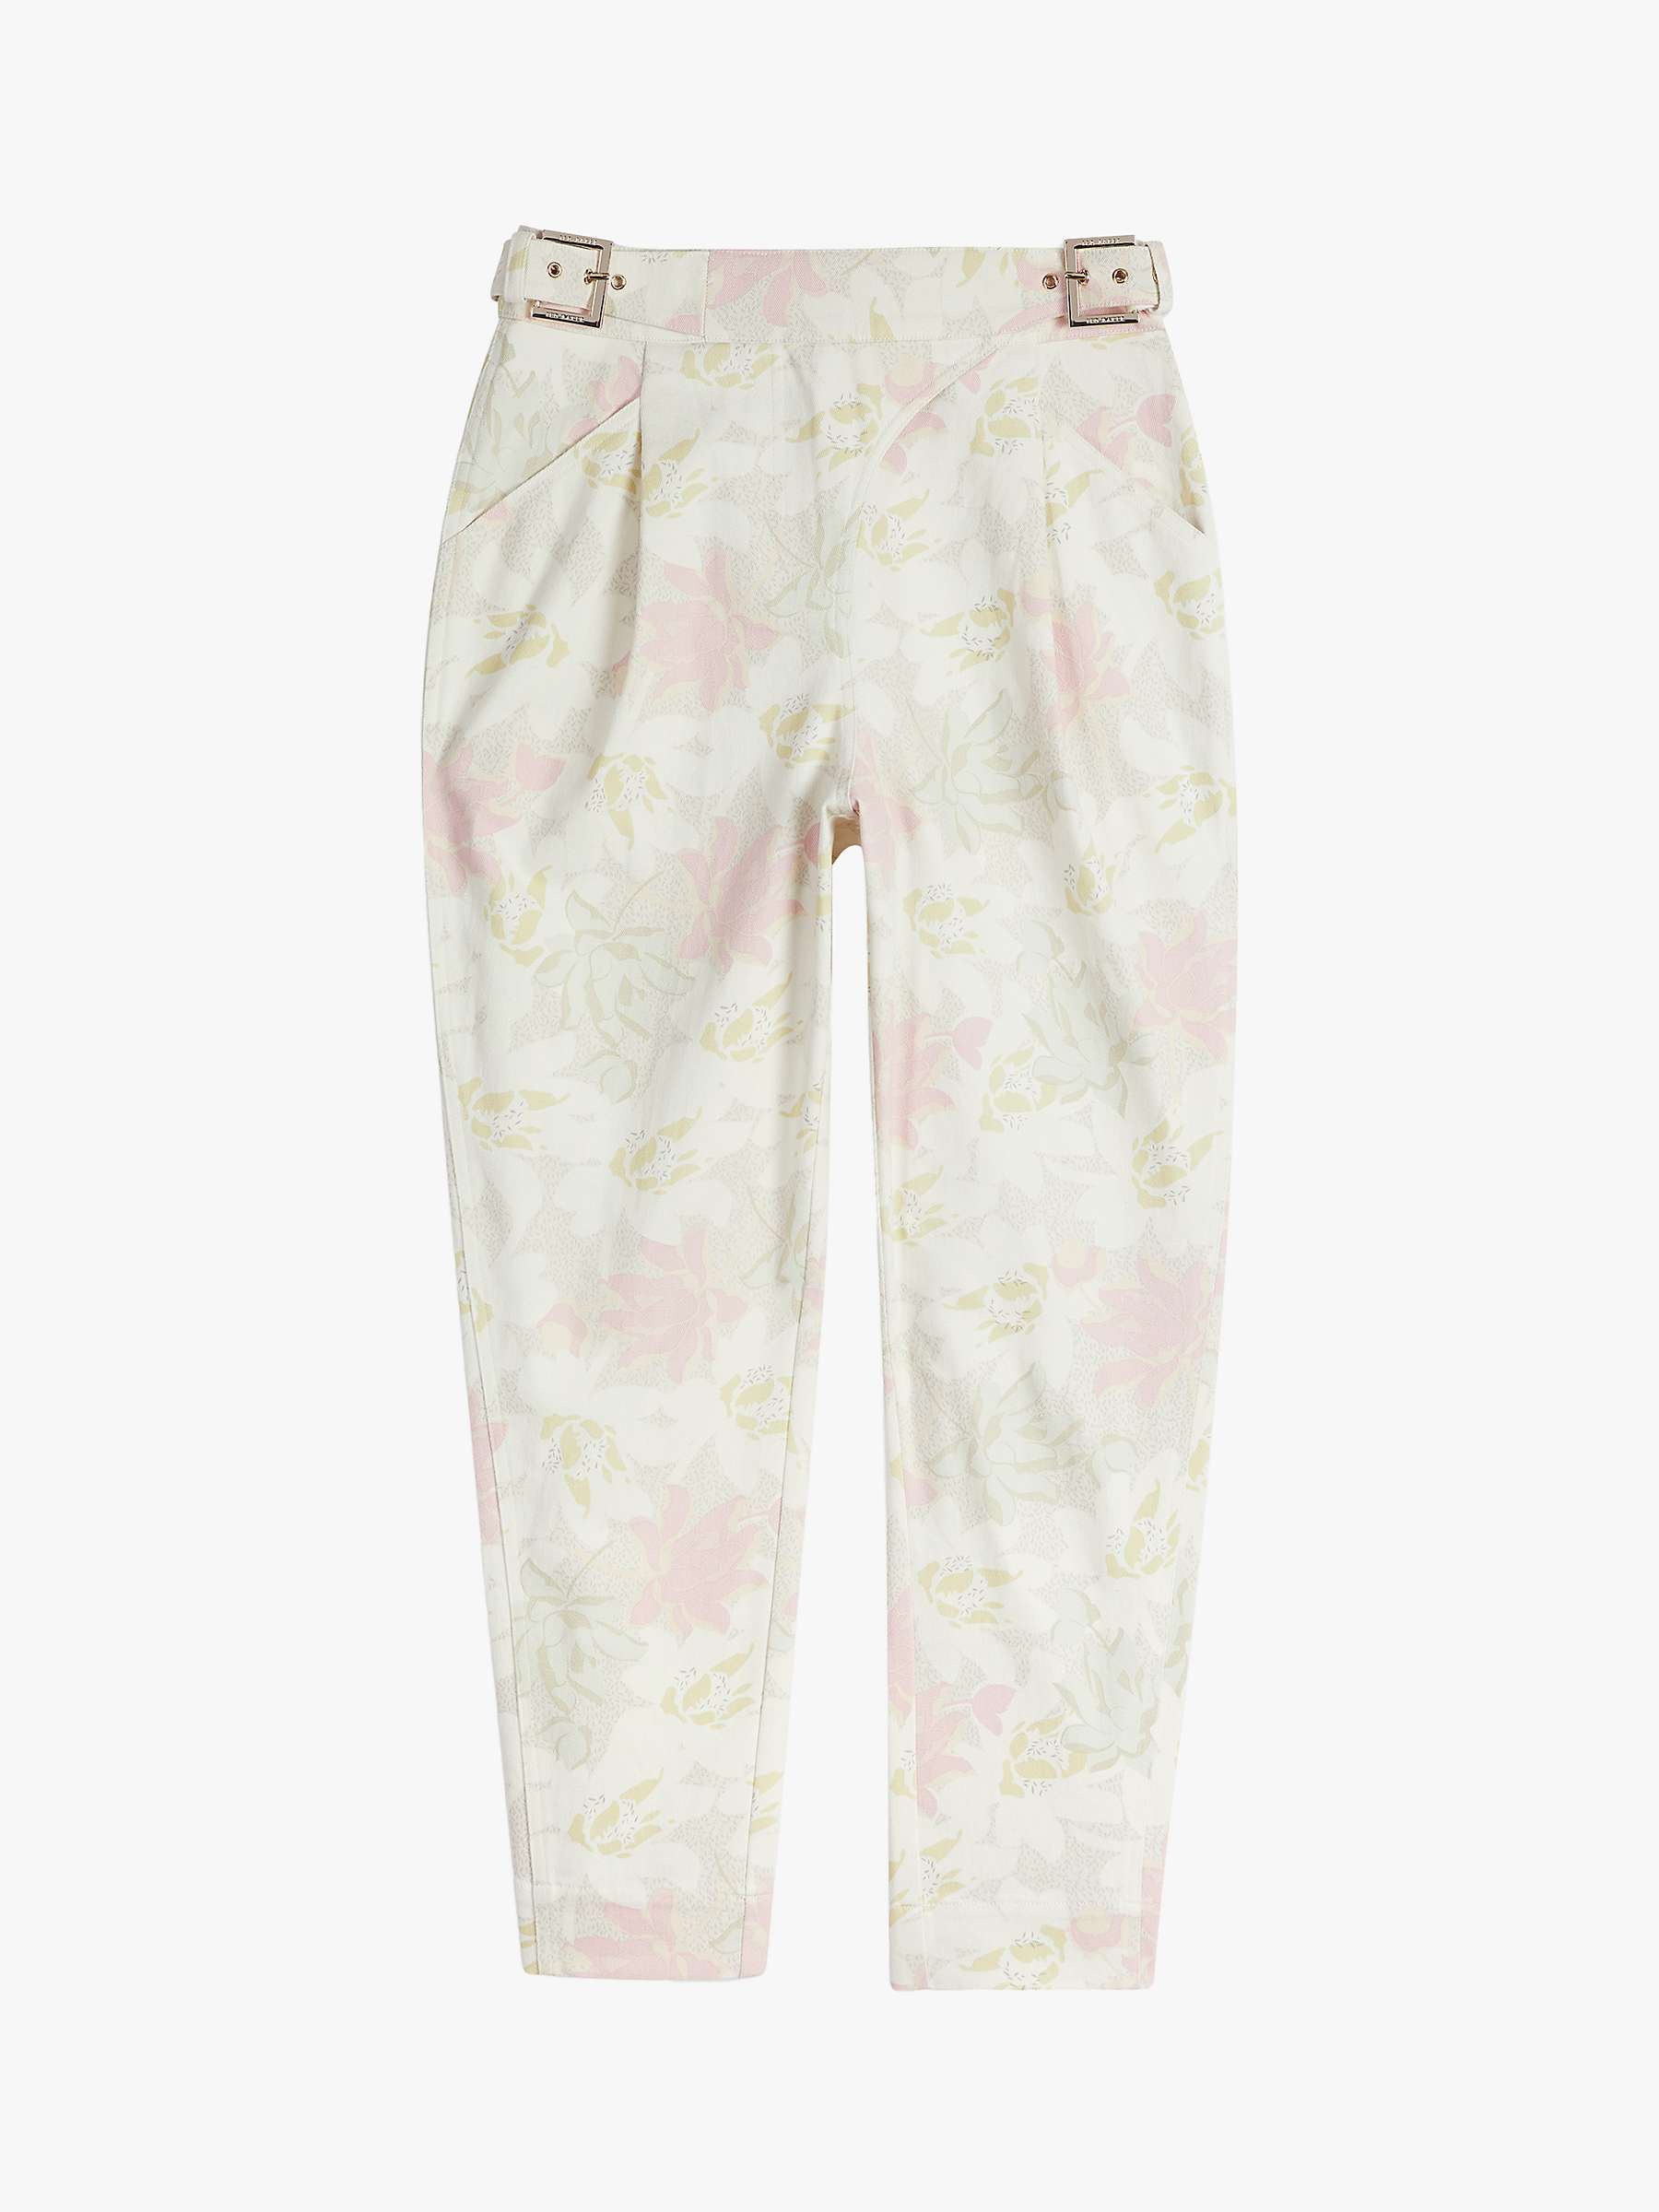 Ted Baker Floral Tapered Trousers, Ivory at John Lewis & Partners